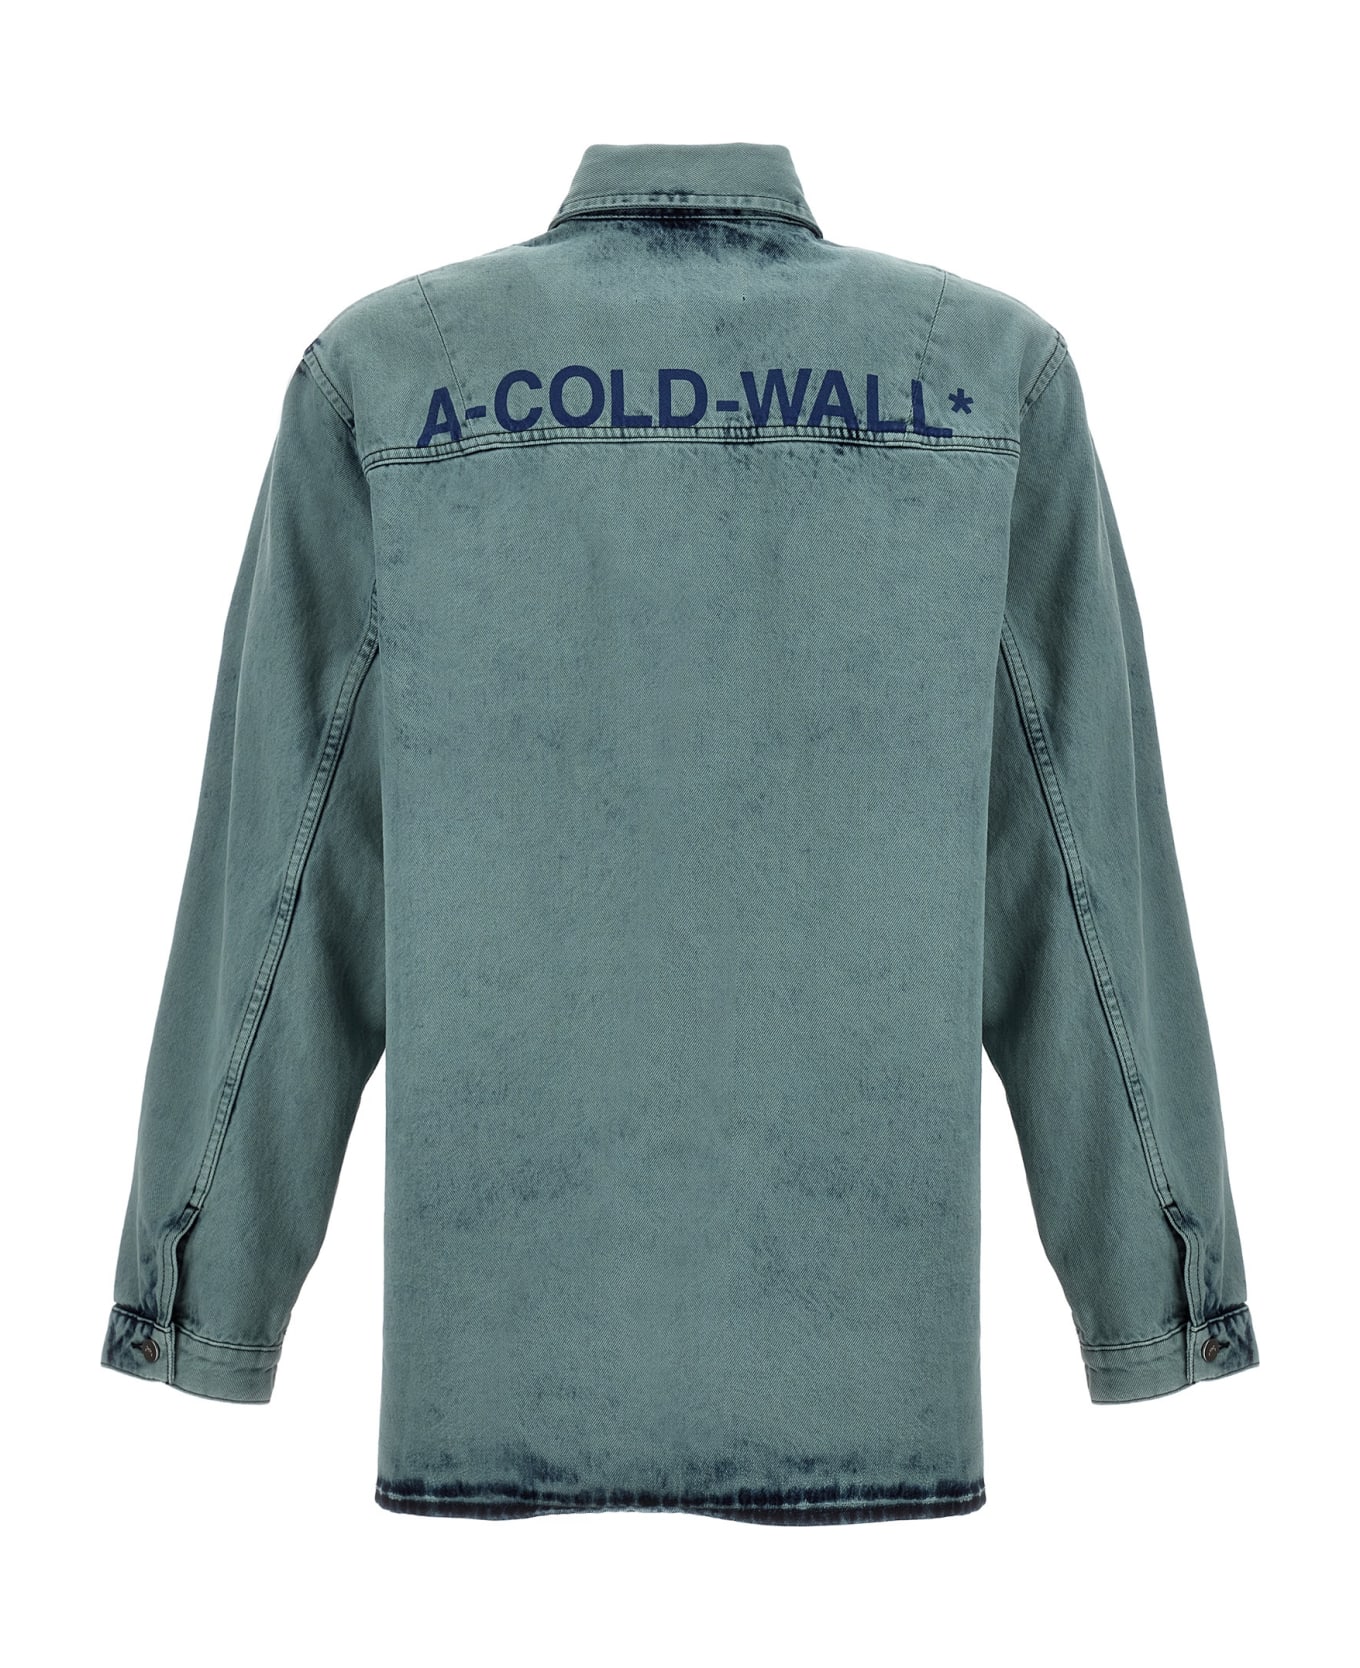 A-COLD-WALL 'bleached Overdyed' Shirt - Light Blue シャツ